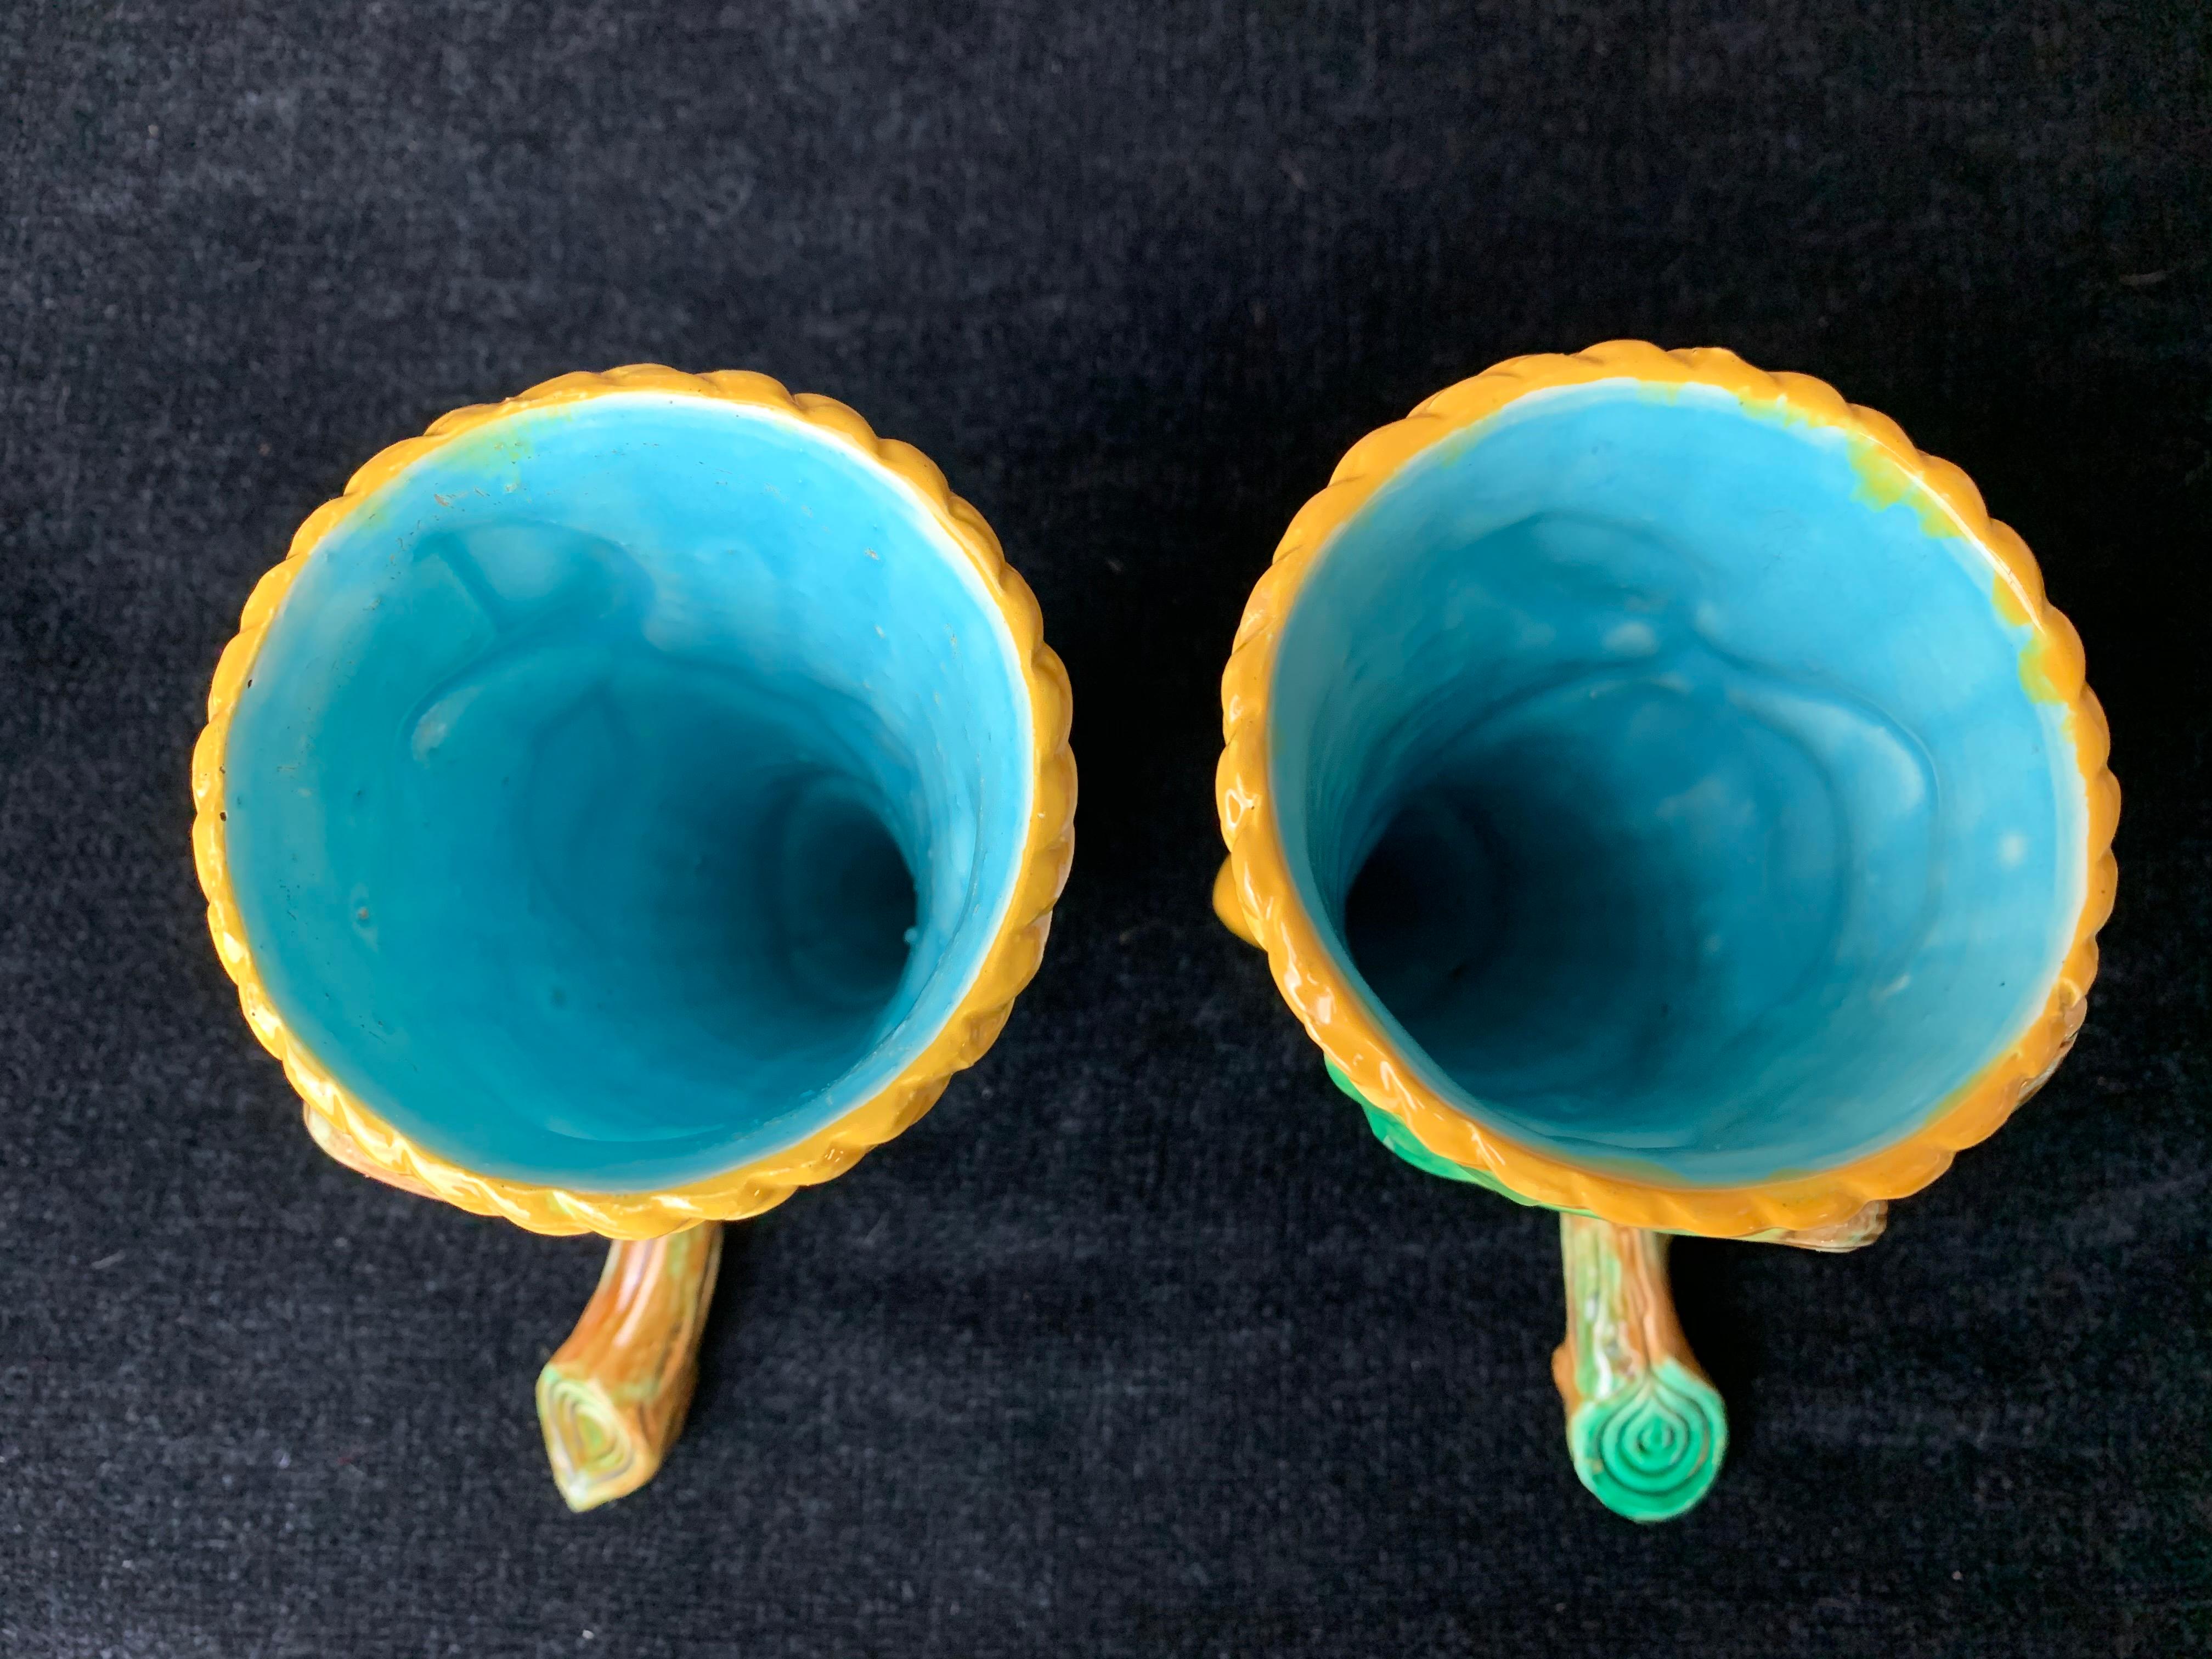 Pair George Jones Majolica Vases White Wicker, Turquoise Lined, English, 1875 In Good Condition For Sale In Banner Elk, NC